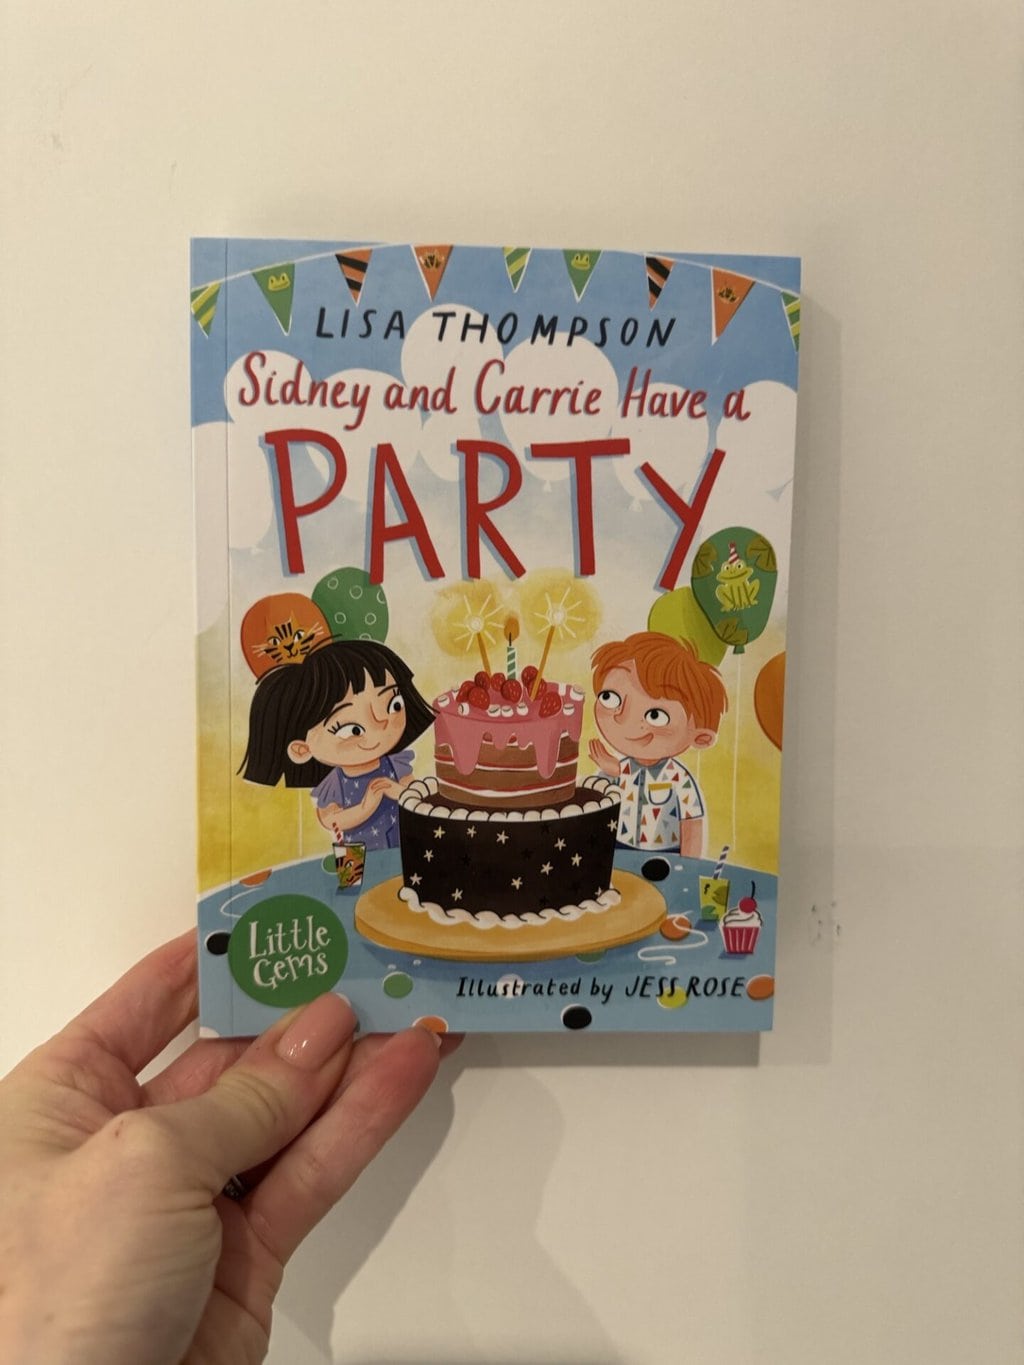 Sidney and Carrie have a Party